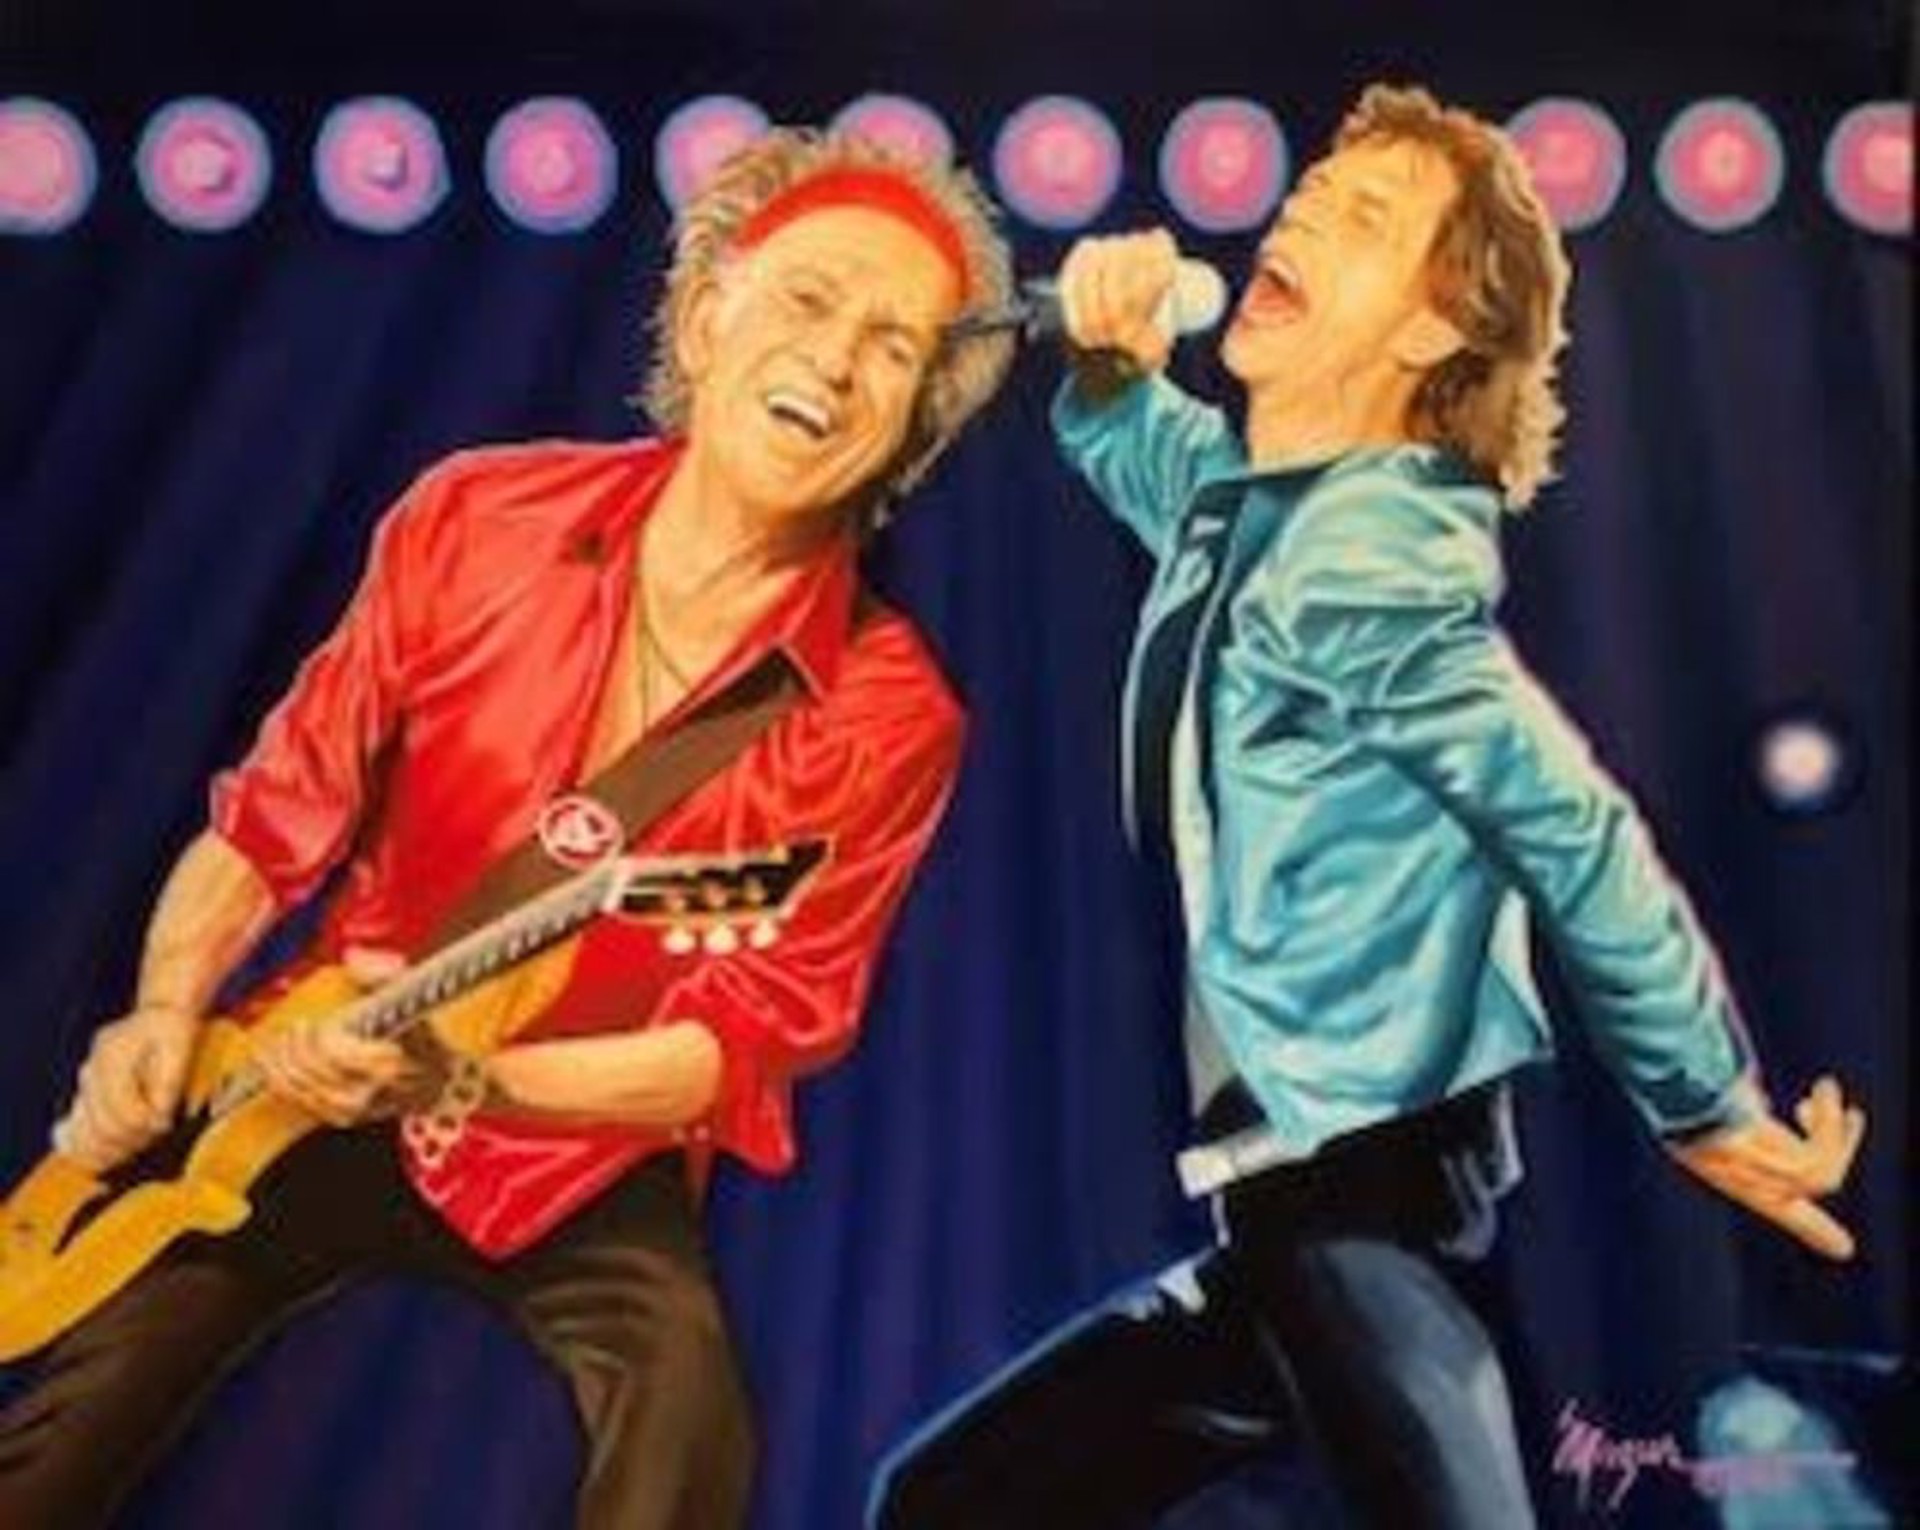 Red Keith & Mick by Ruby Mazur